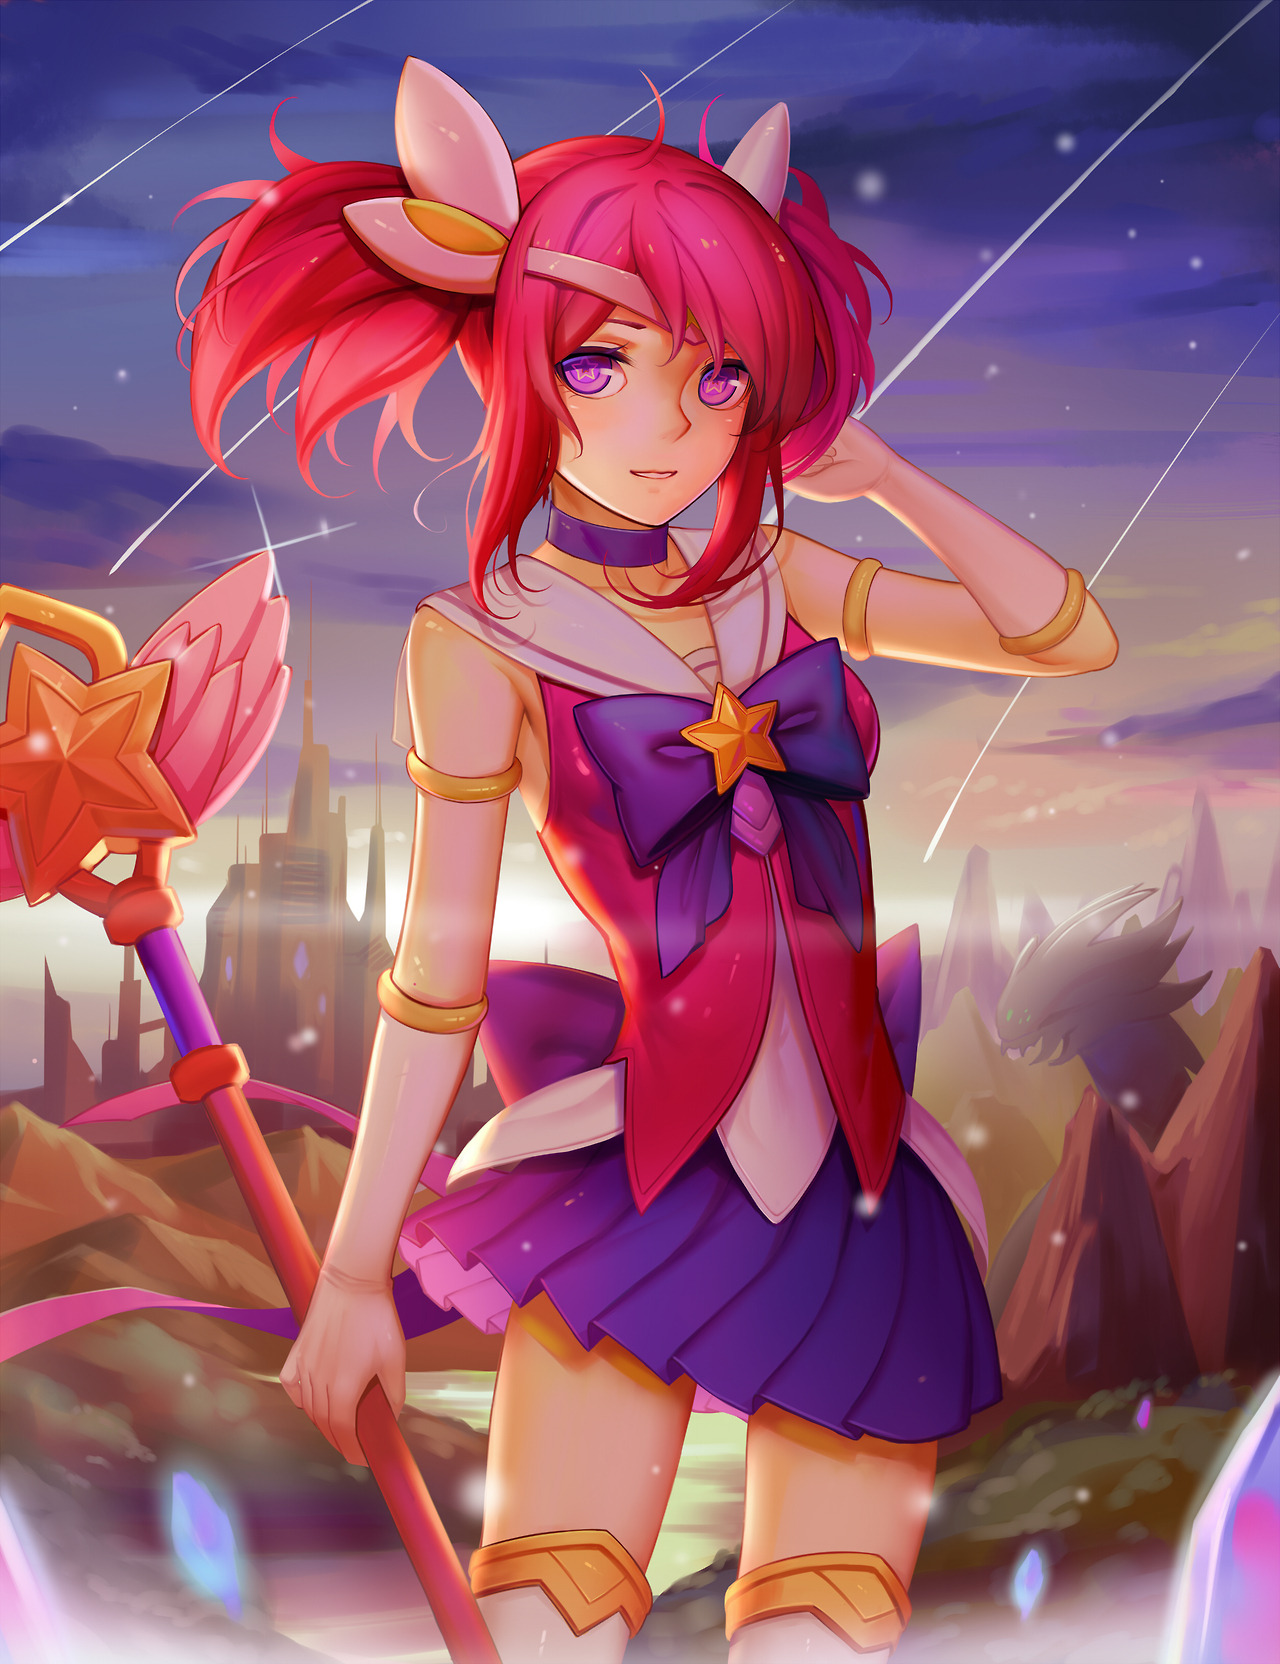 Star Guardian Ahri skin League of Legends game 27 Nov 2018Random  Anime Arts rARTs Collection of anime pictures